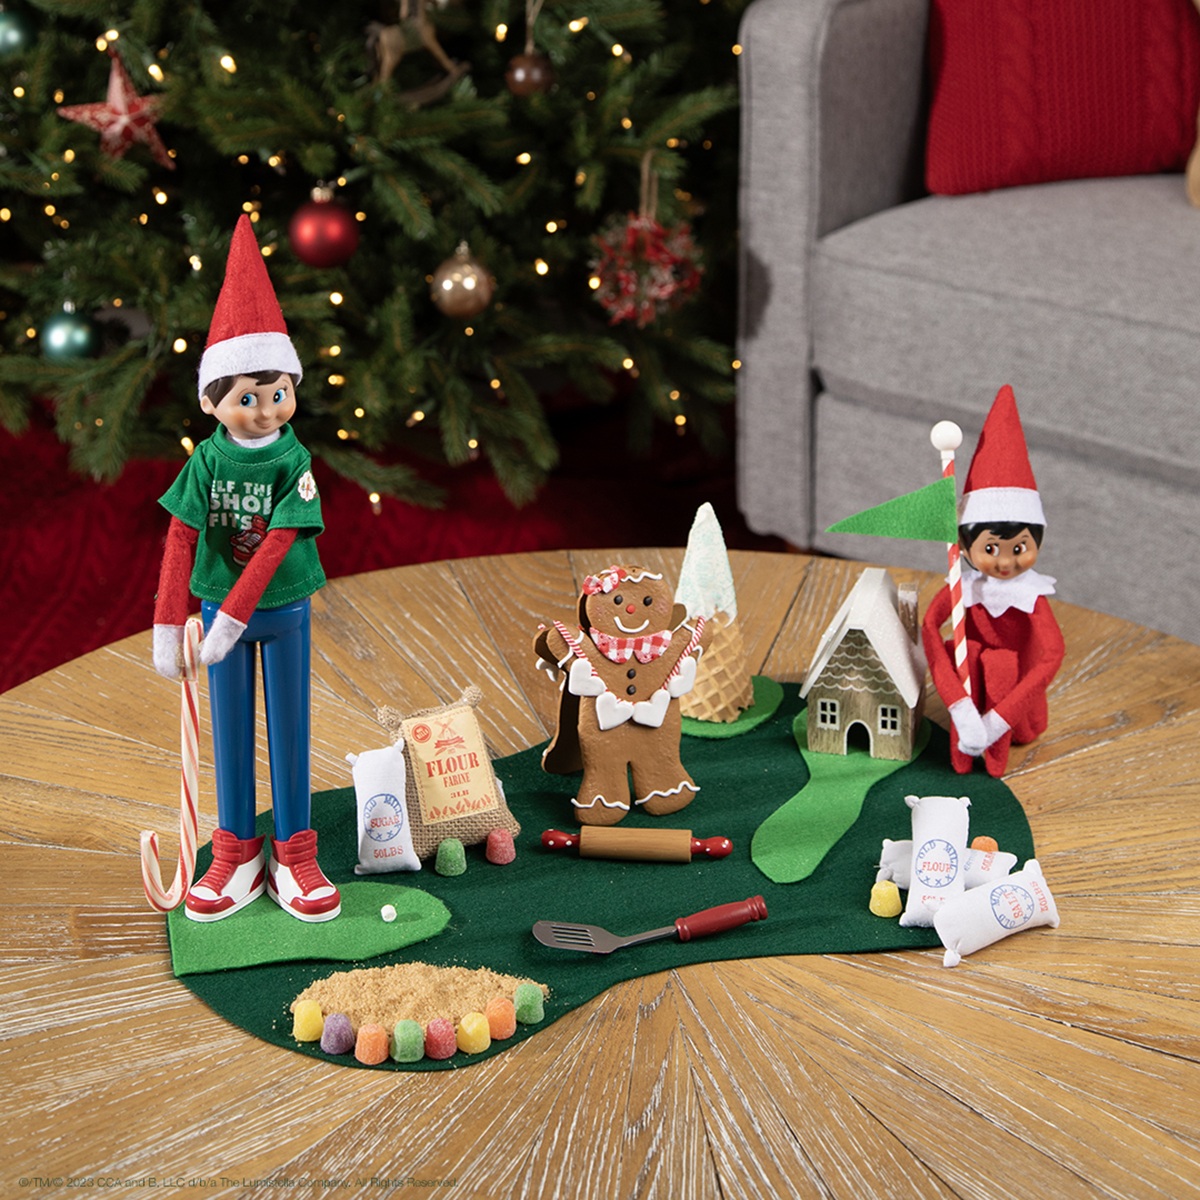 Alt text: The Elf on the Shelf and friend playing golf with a candy cane golf club.
